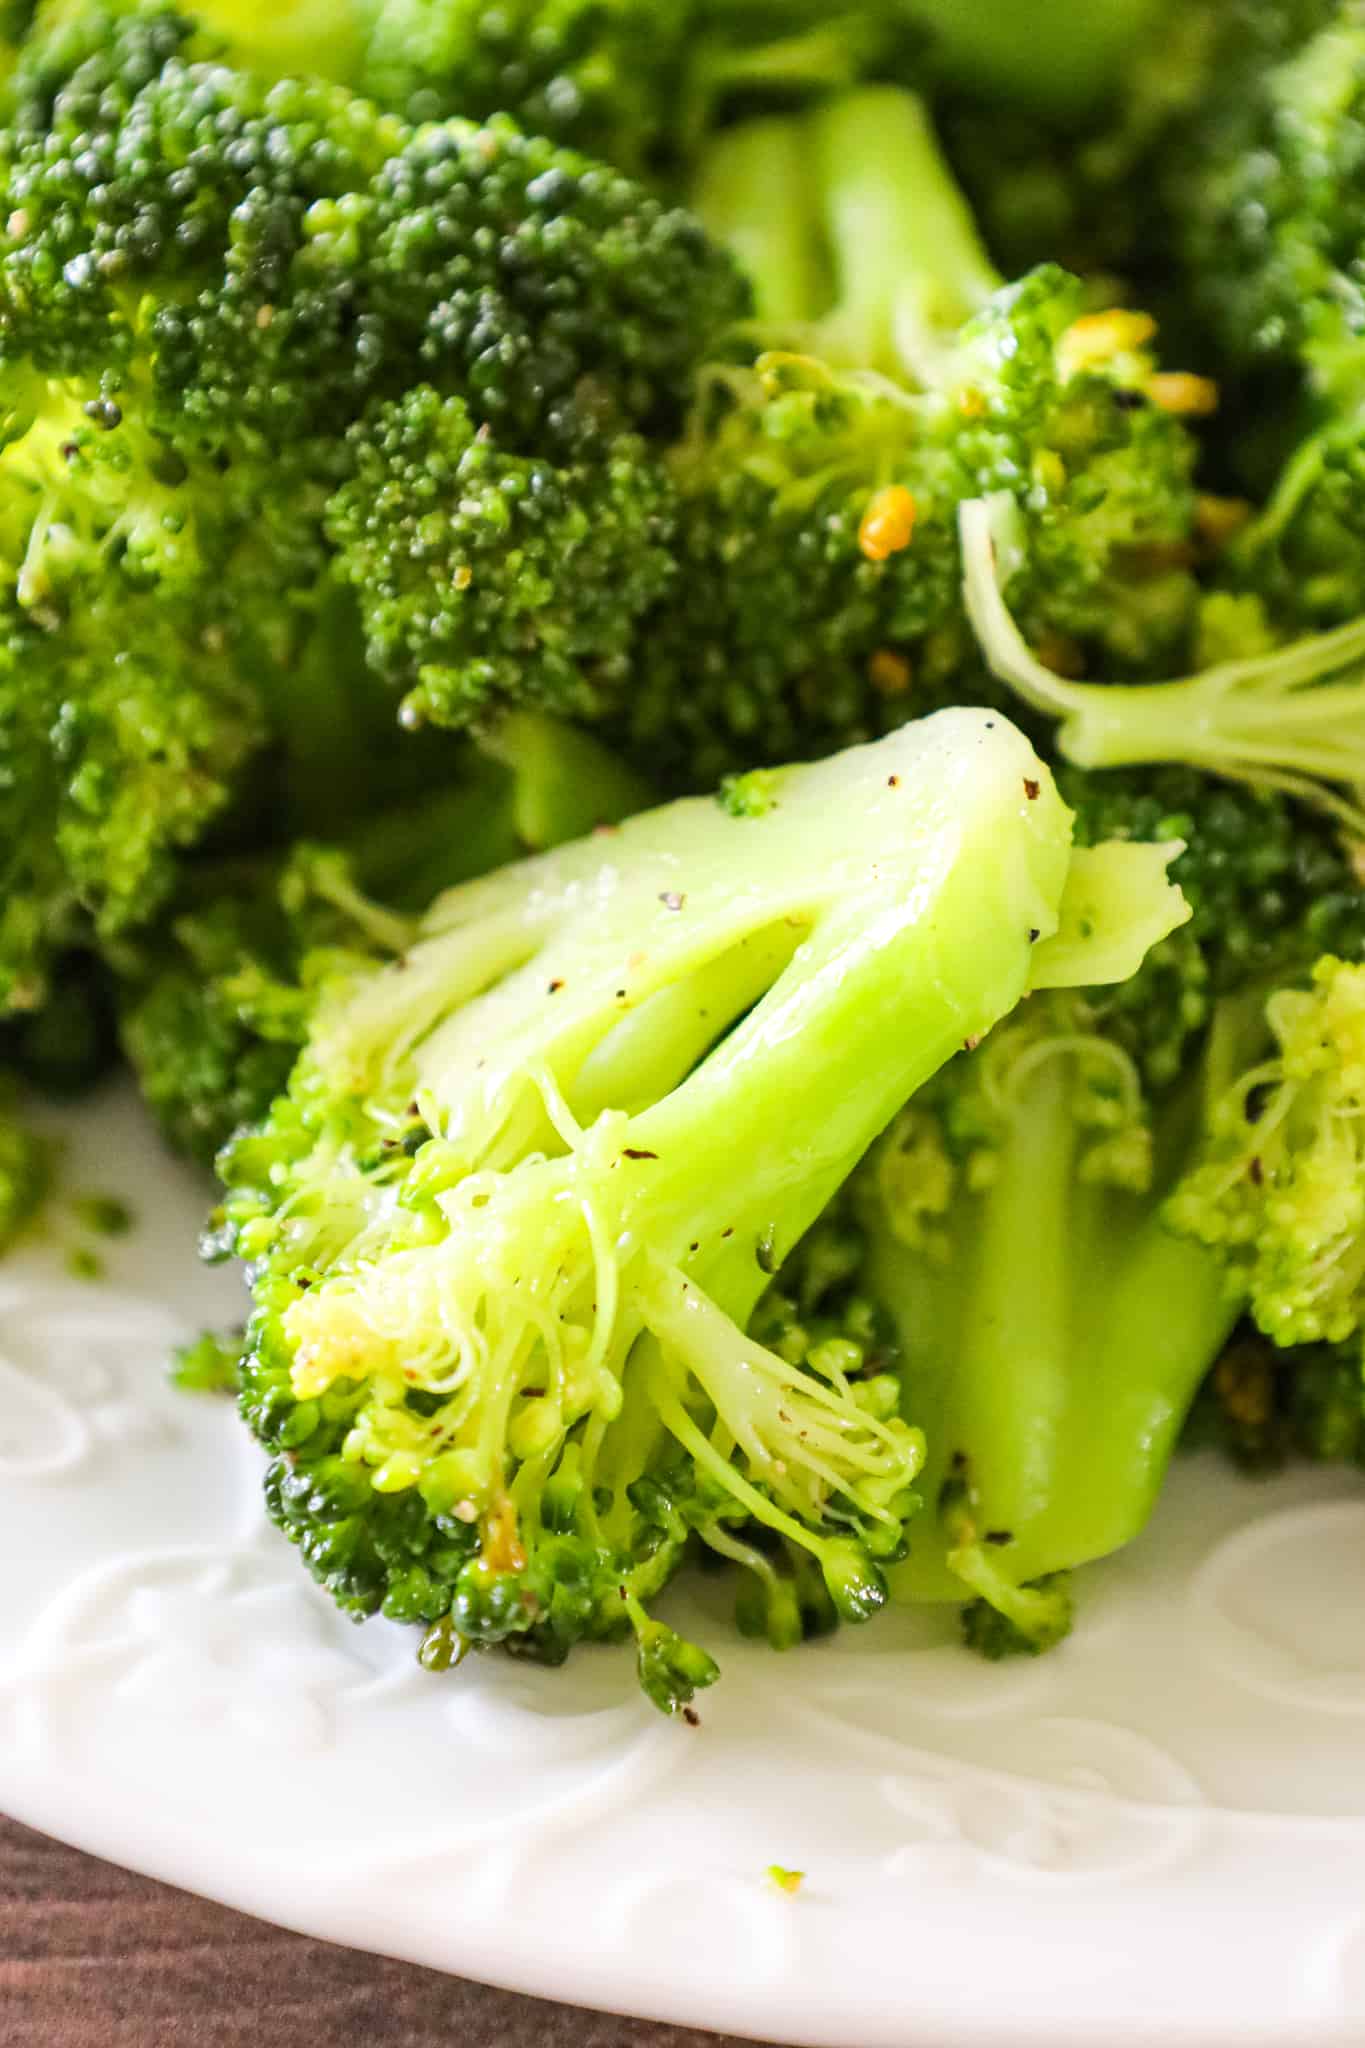 Instant Pot Broccoli is a simple and delicious pressure cooker side dish recipe.